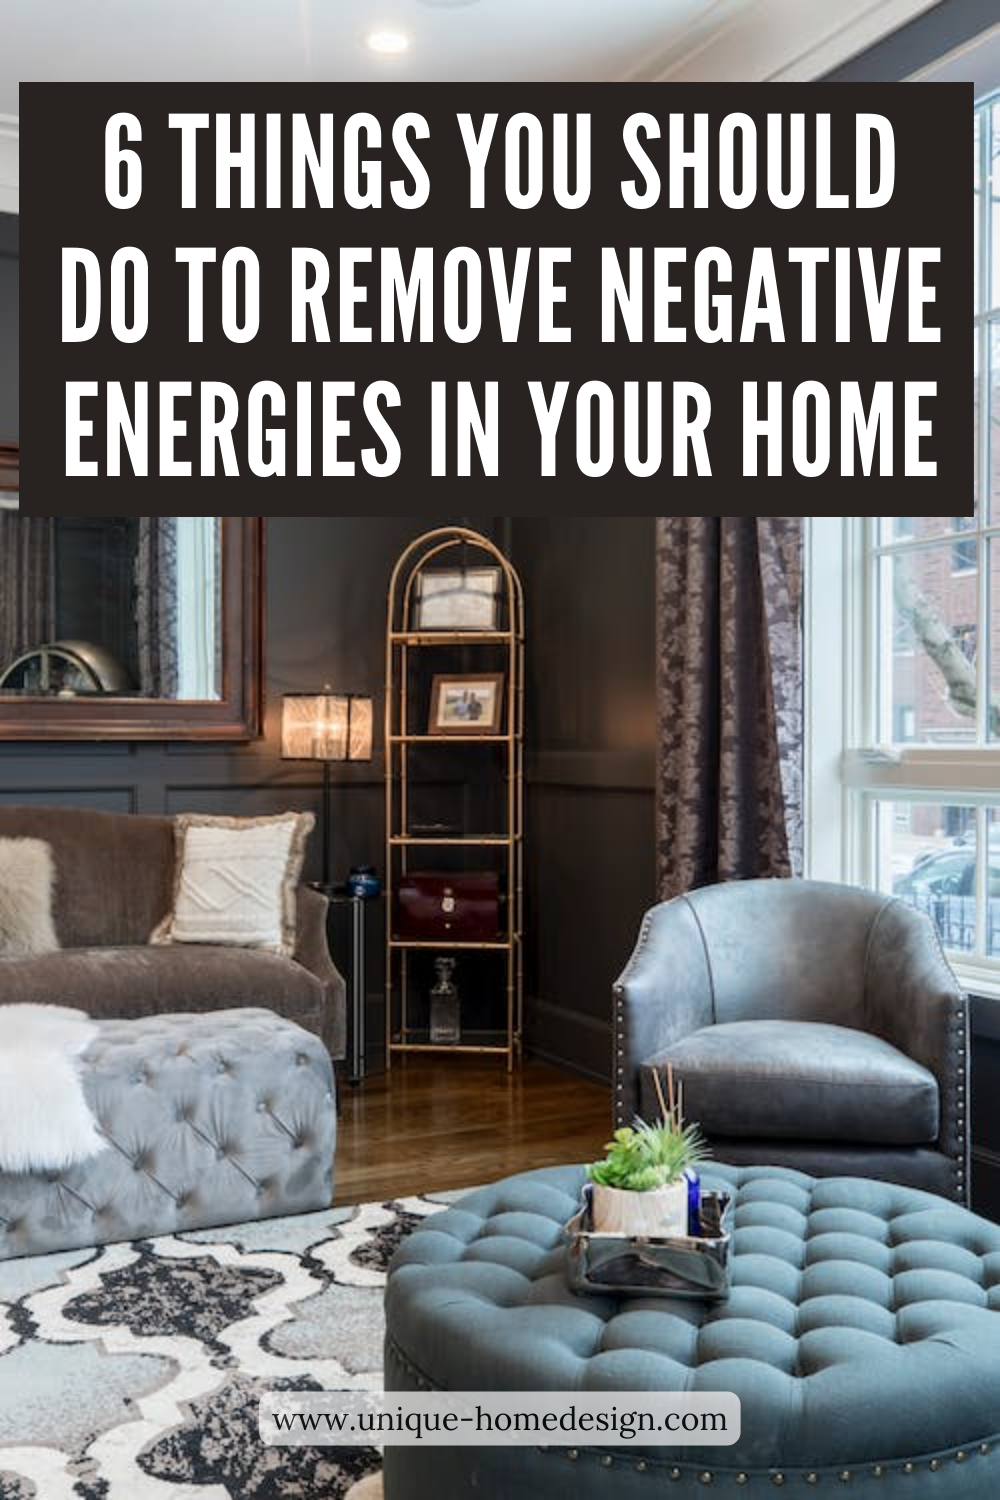 6 Things You Should Do To Remove Negative Energies In Your Home